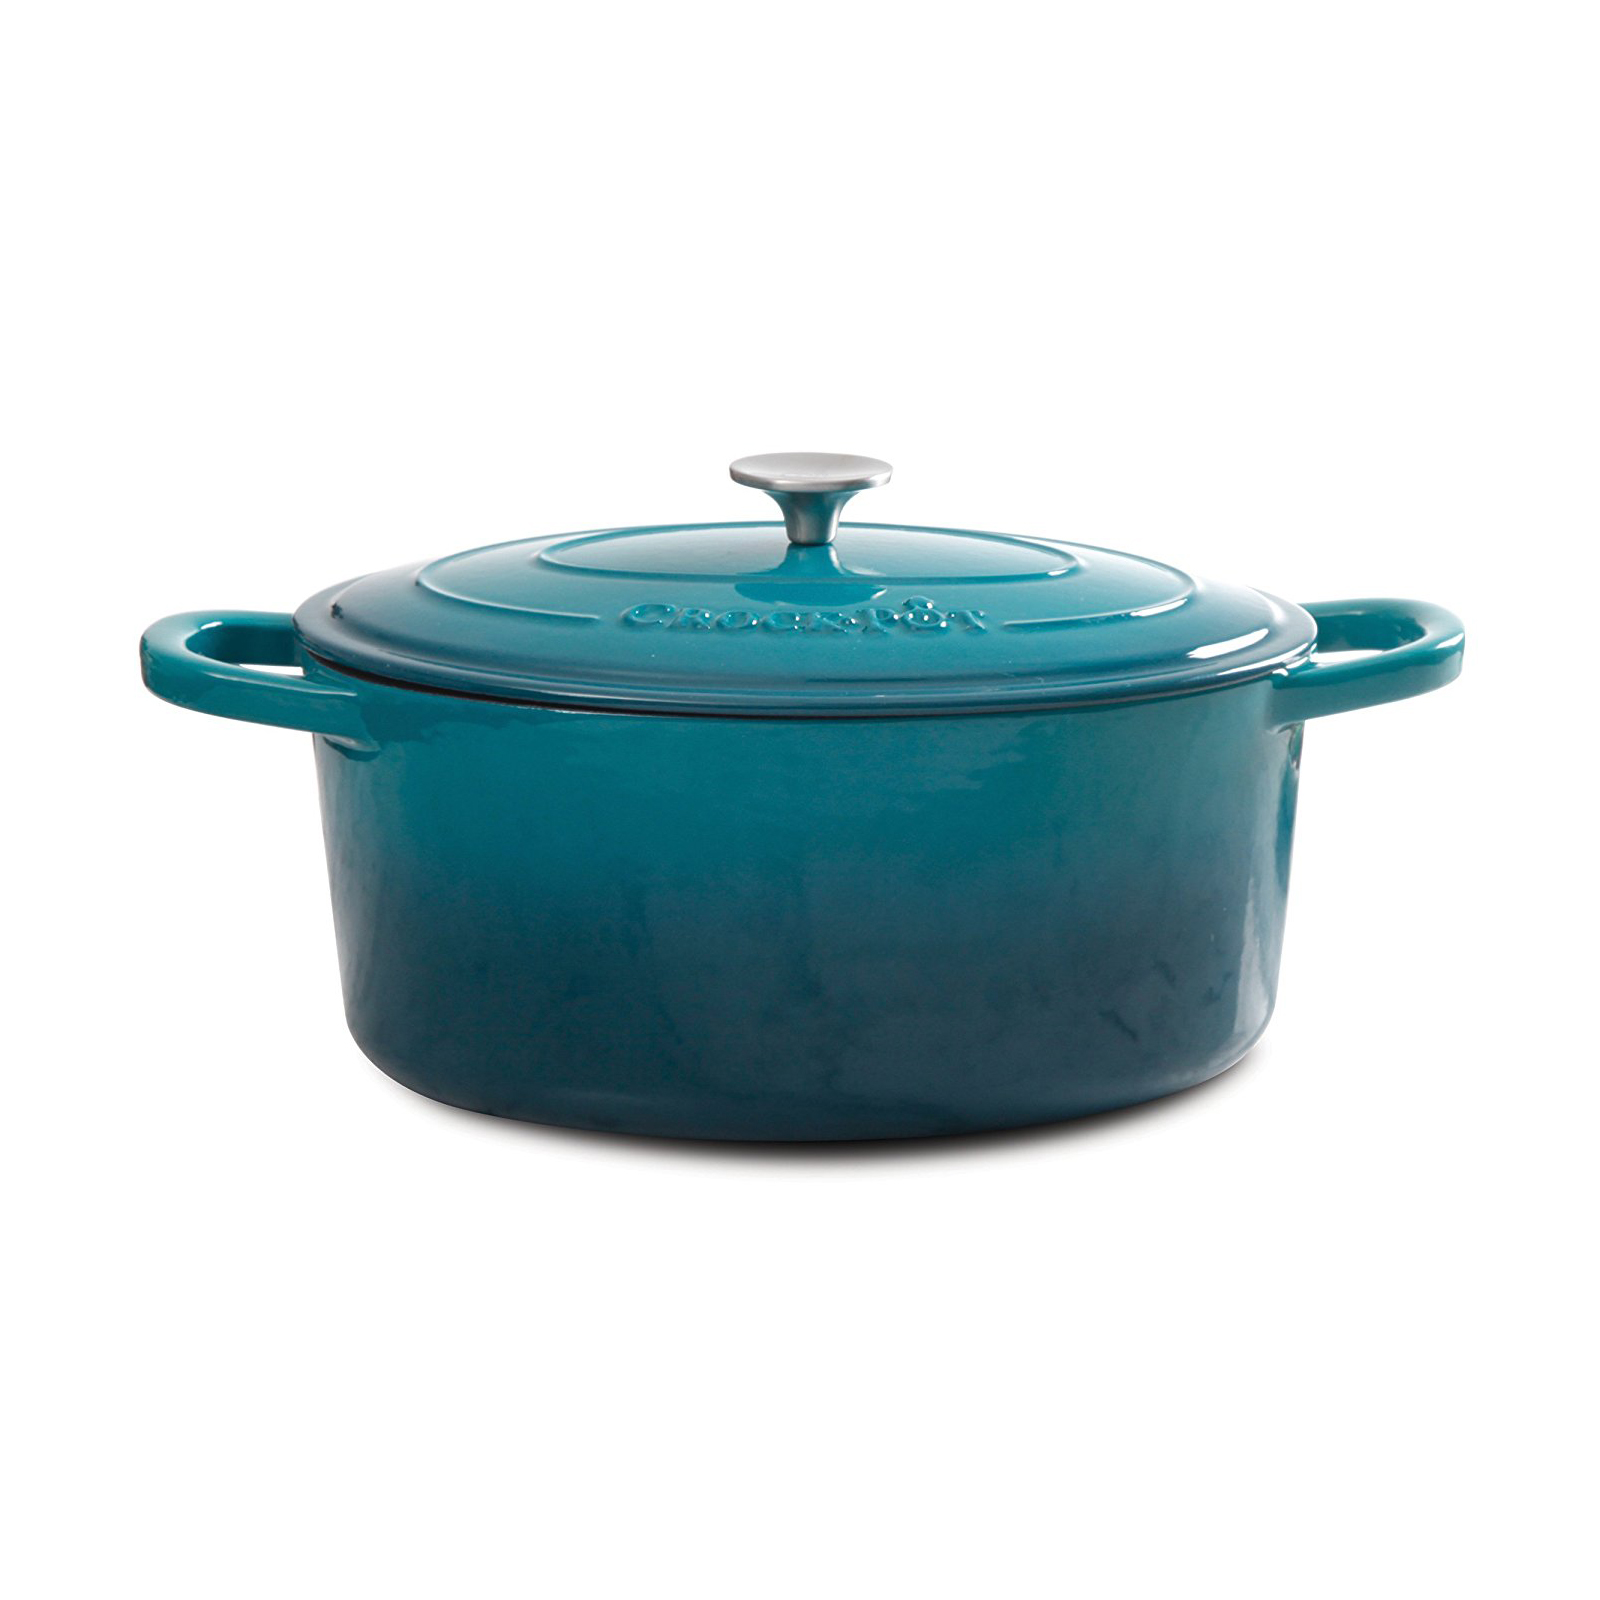 Crock-Pot. Artisan Round Dutch Oven in Teal Ombre